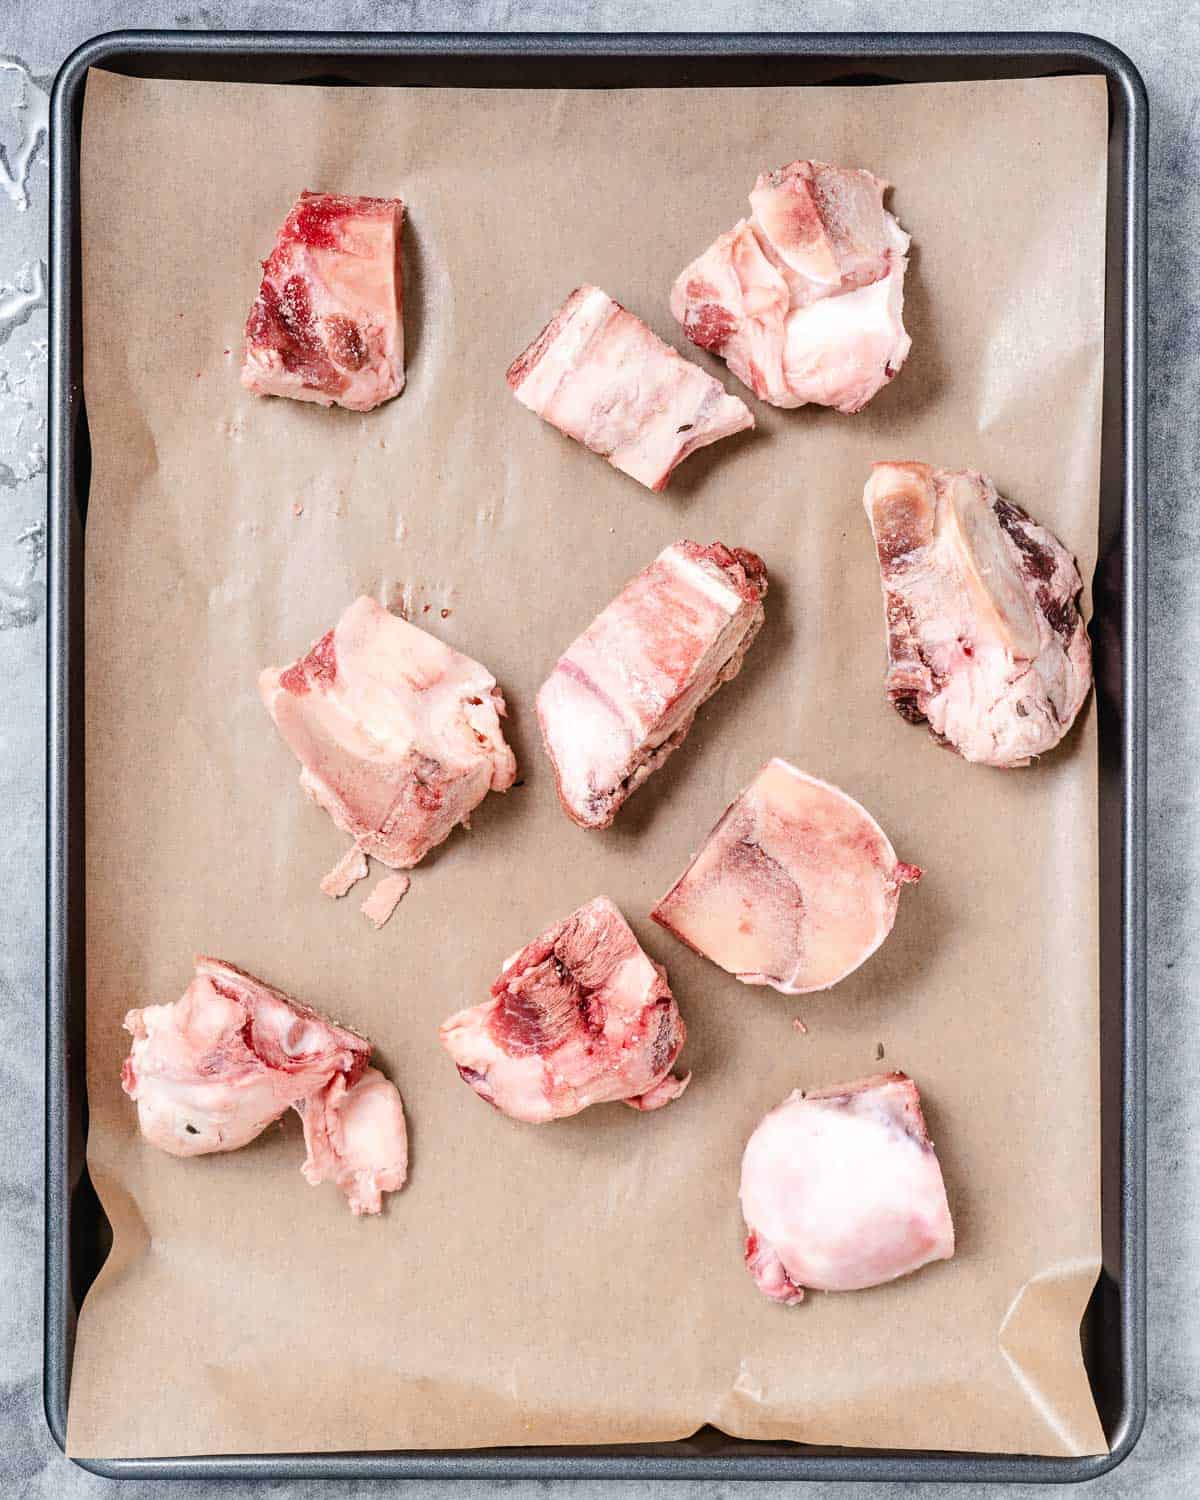 Beef bones on parchment lined baking sheet.